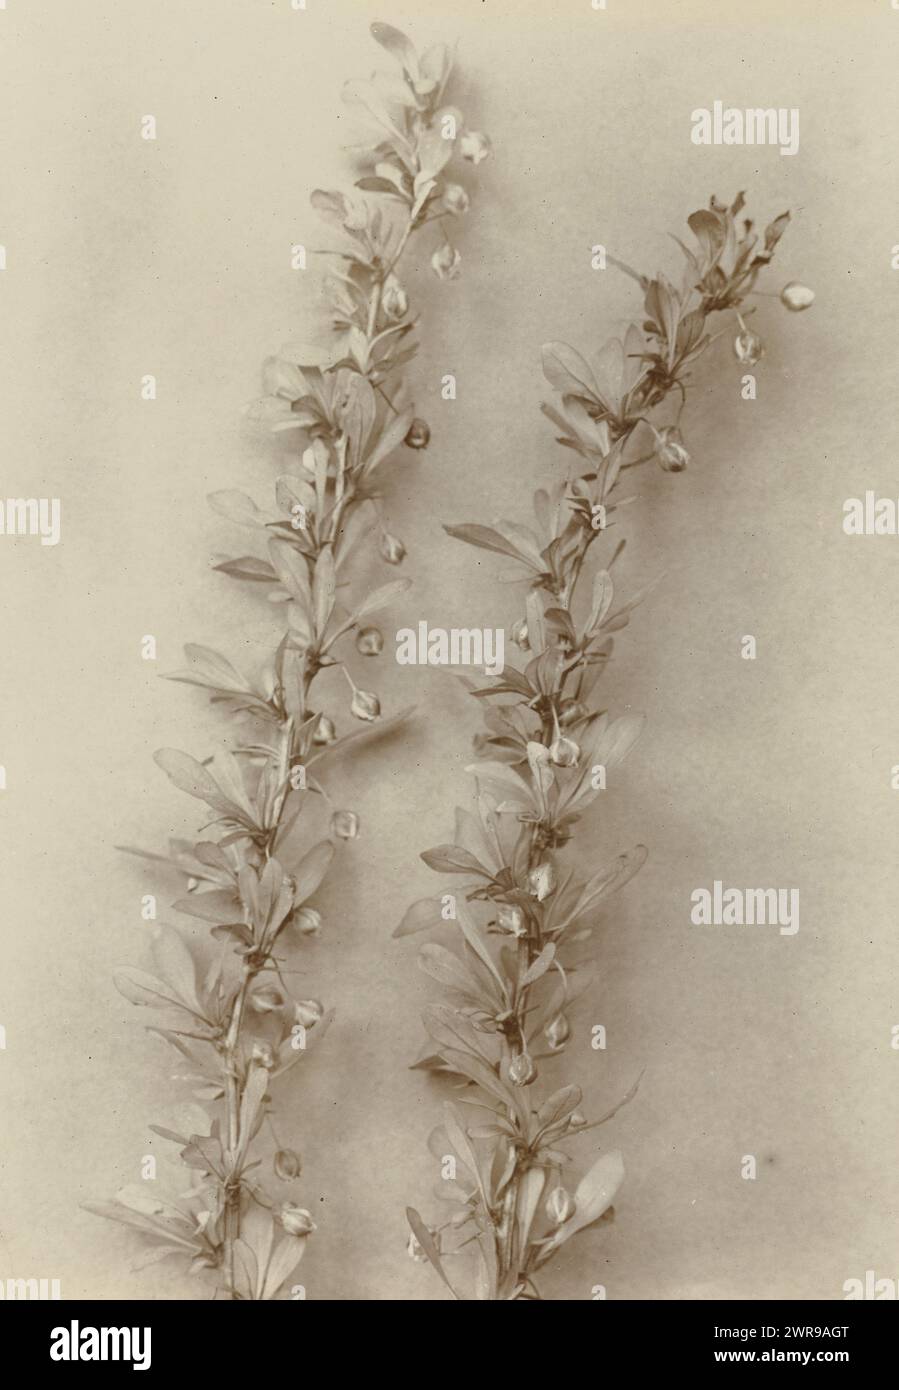 Branches of a barberry, Berberis Thunbergii, flowering time (title on object), Richard Tepe, Netherlands, c. 1900 - c. 1930, photographic support, height 165 mm × width 115 mm, photograph Stock Photo